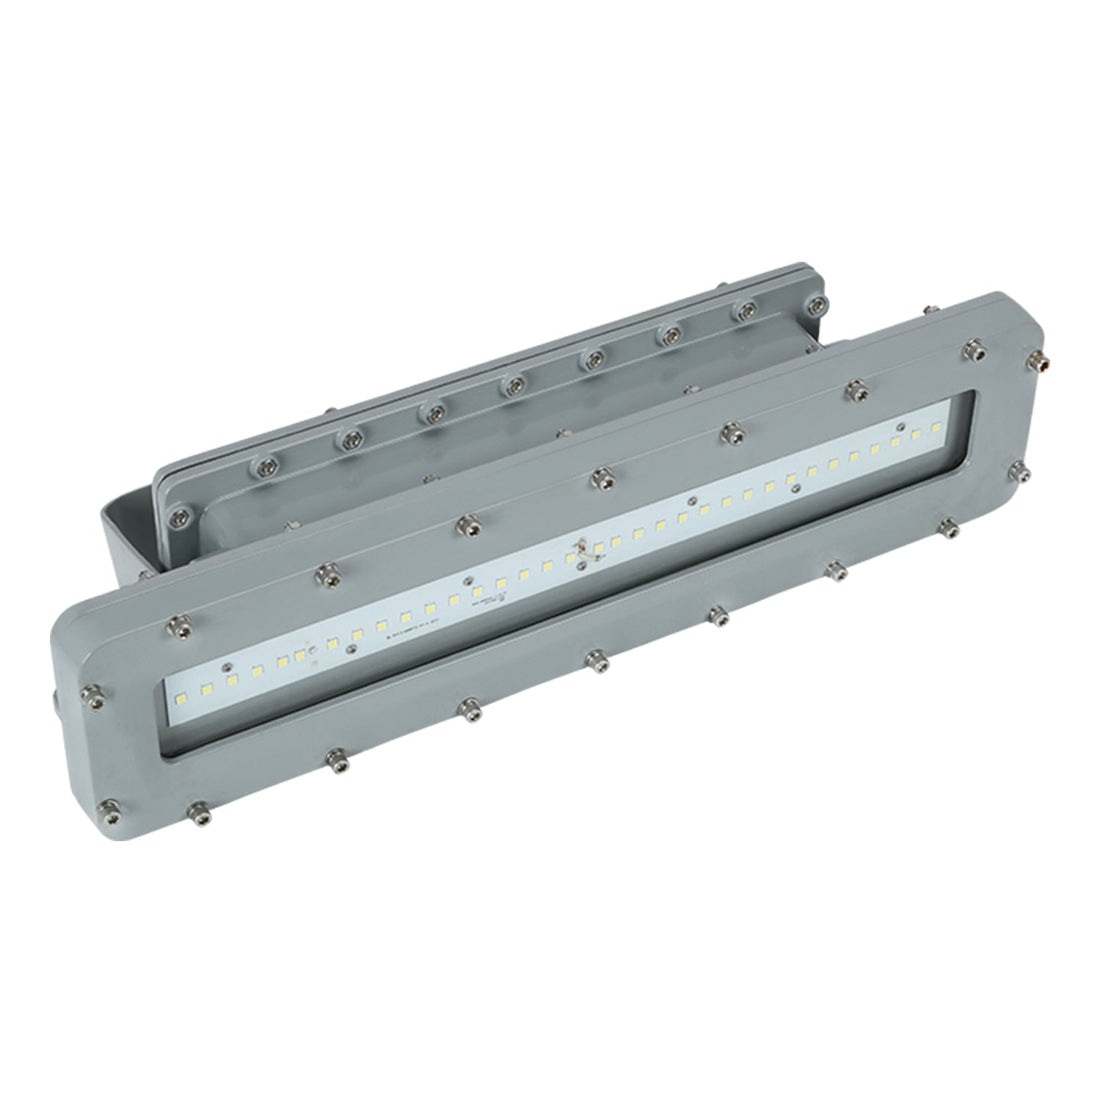 I Series 40W Non-Dimmable LED Explosion Proof Linear Light: Energy-Efficient Lighting Solution for Hazardous Locations with 5400LM and IP66 Protection, Ideal for Industrial Environments